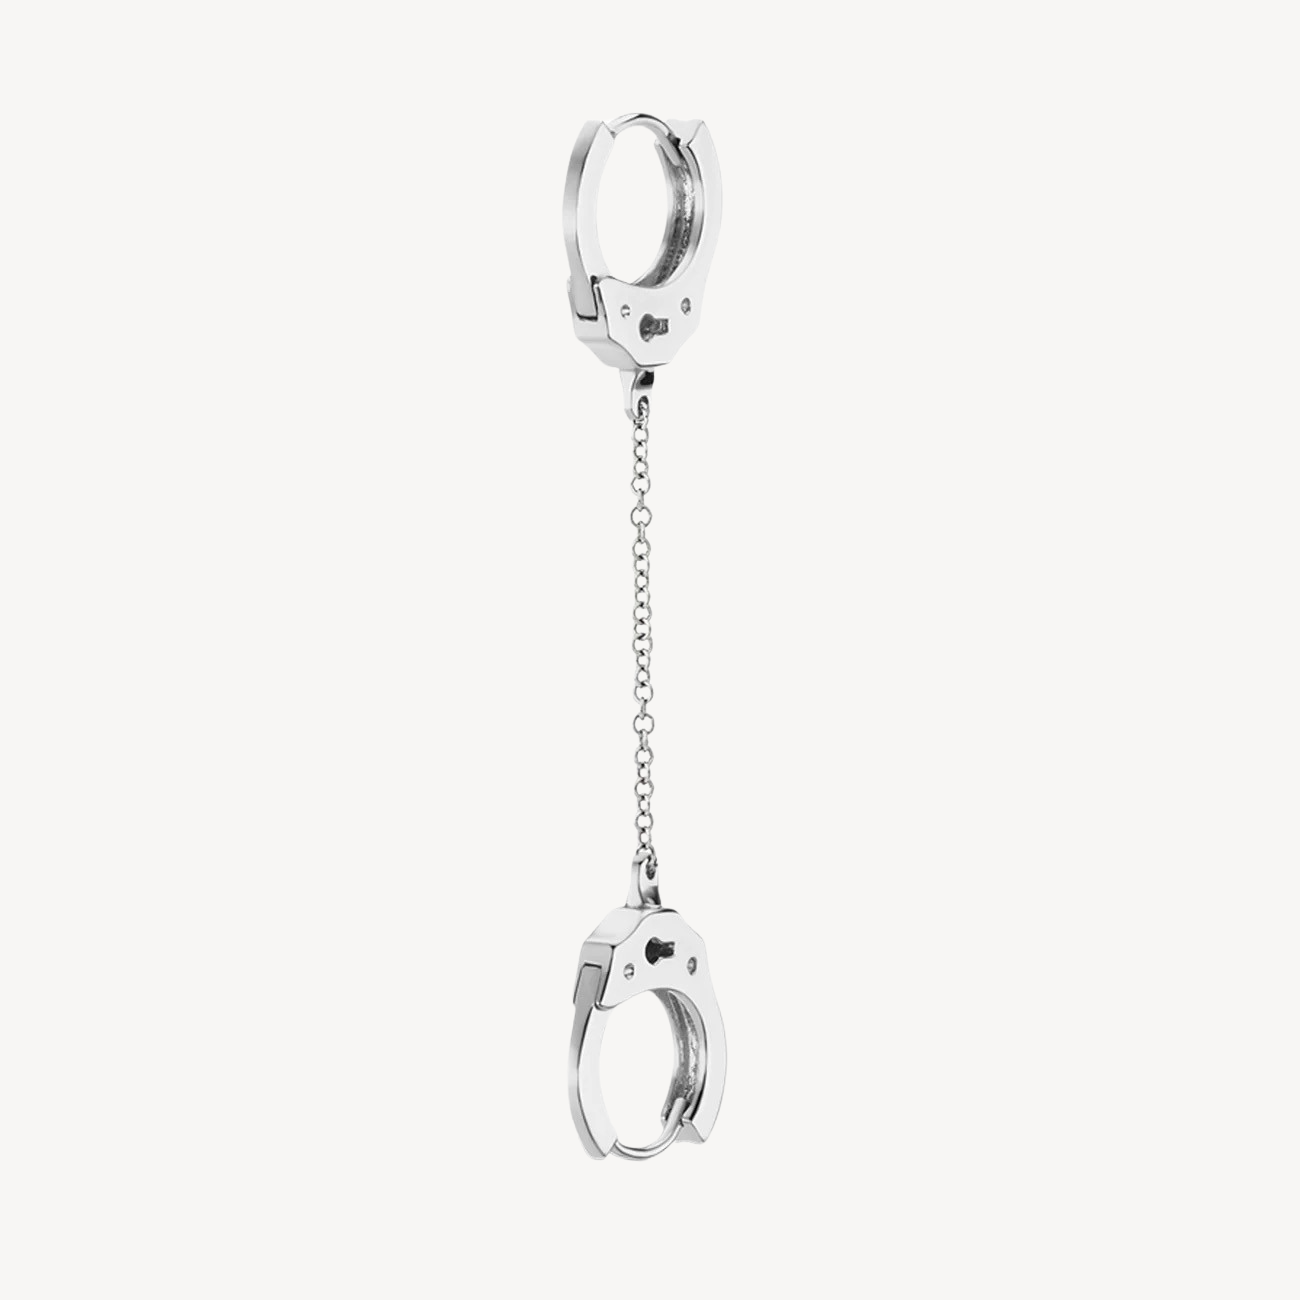 8mm White Gold Handcuff Earring 